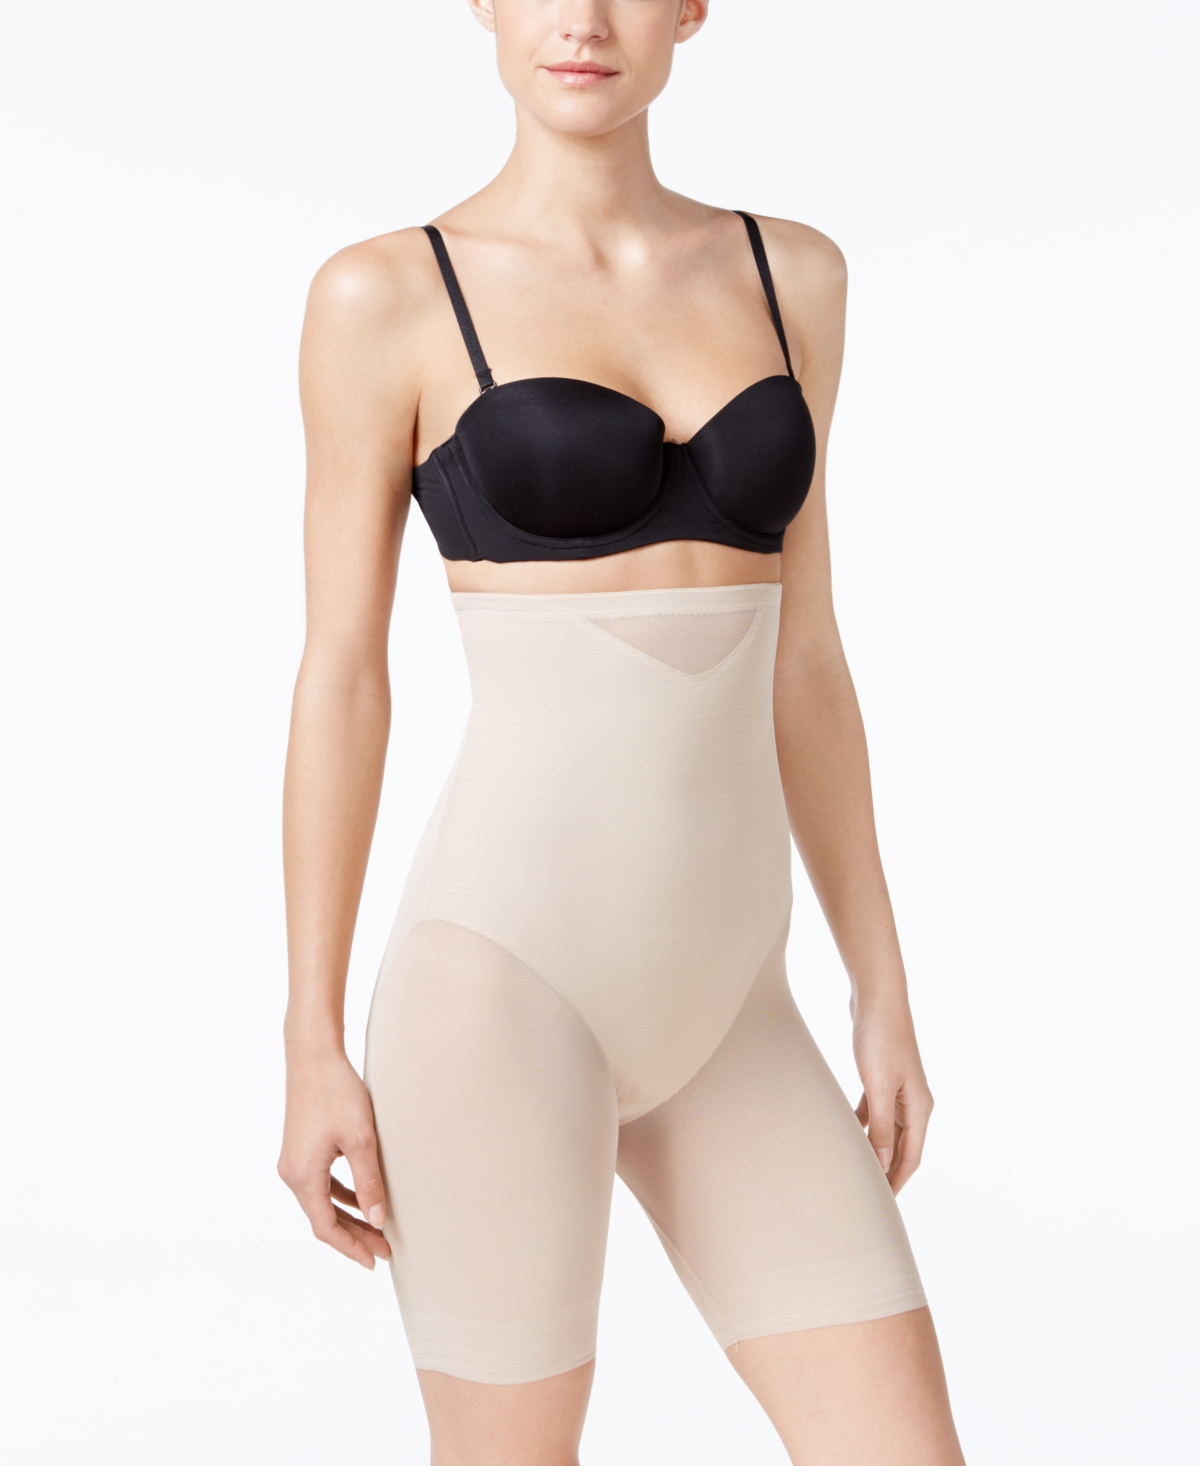 UPC 080225333558 product image for Miraclesuit Women's Extra Firm Tummy-Control Sheer Trim Thigh Slimmer 2789 | upcitemdb.com